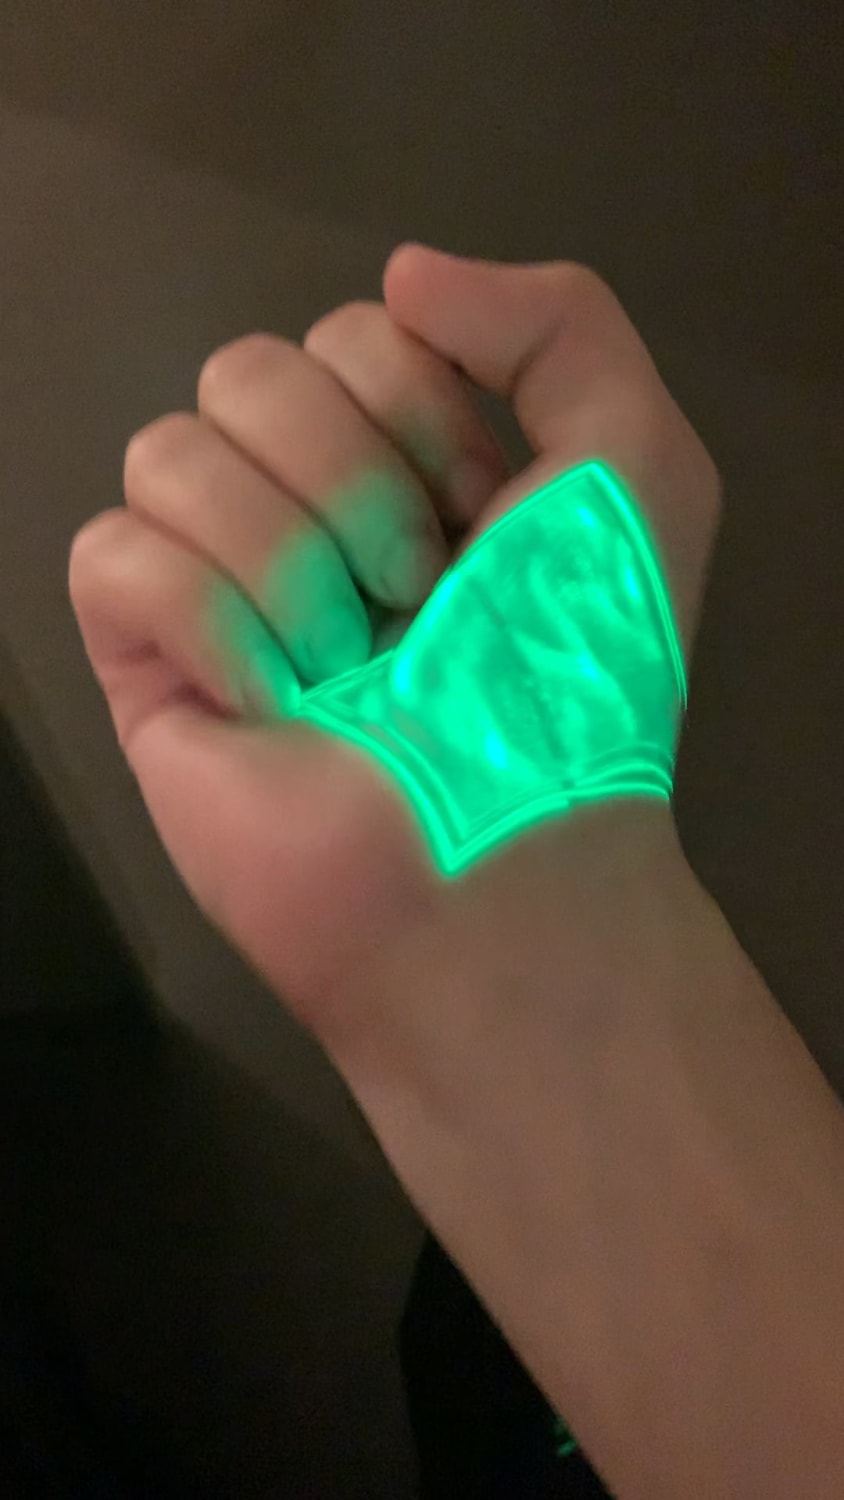 My Hospital’s Vein Finder Illuminates veins as opposed to a typical darkening setting. This device helps medical professionals find and assist with IV insertions. Other-worldly.